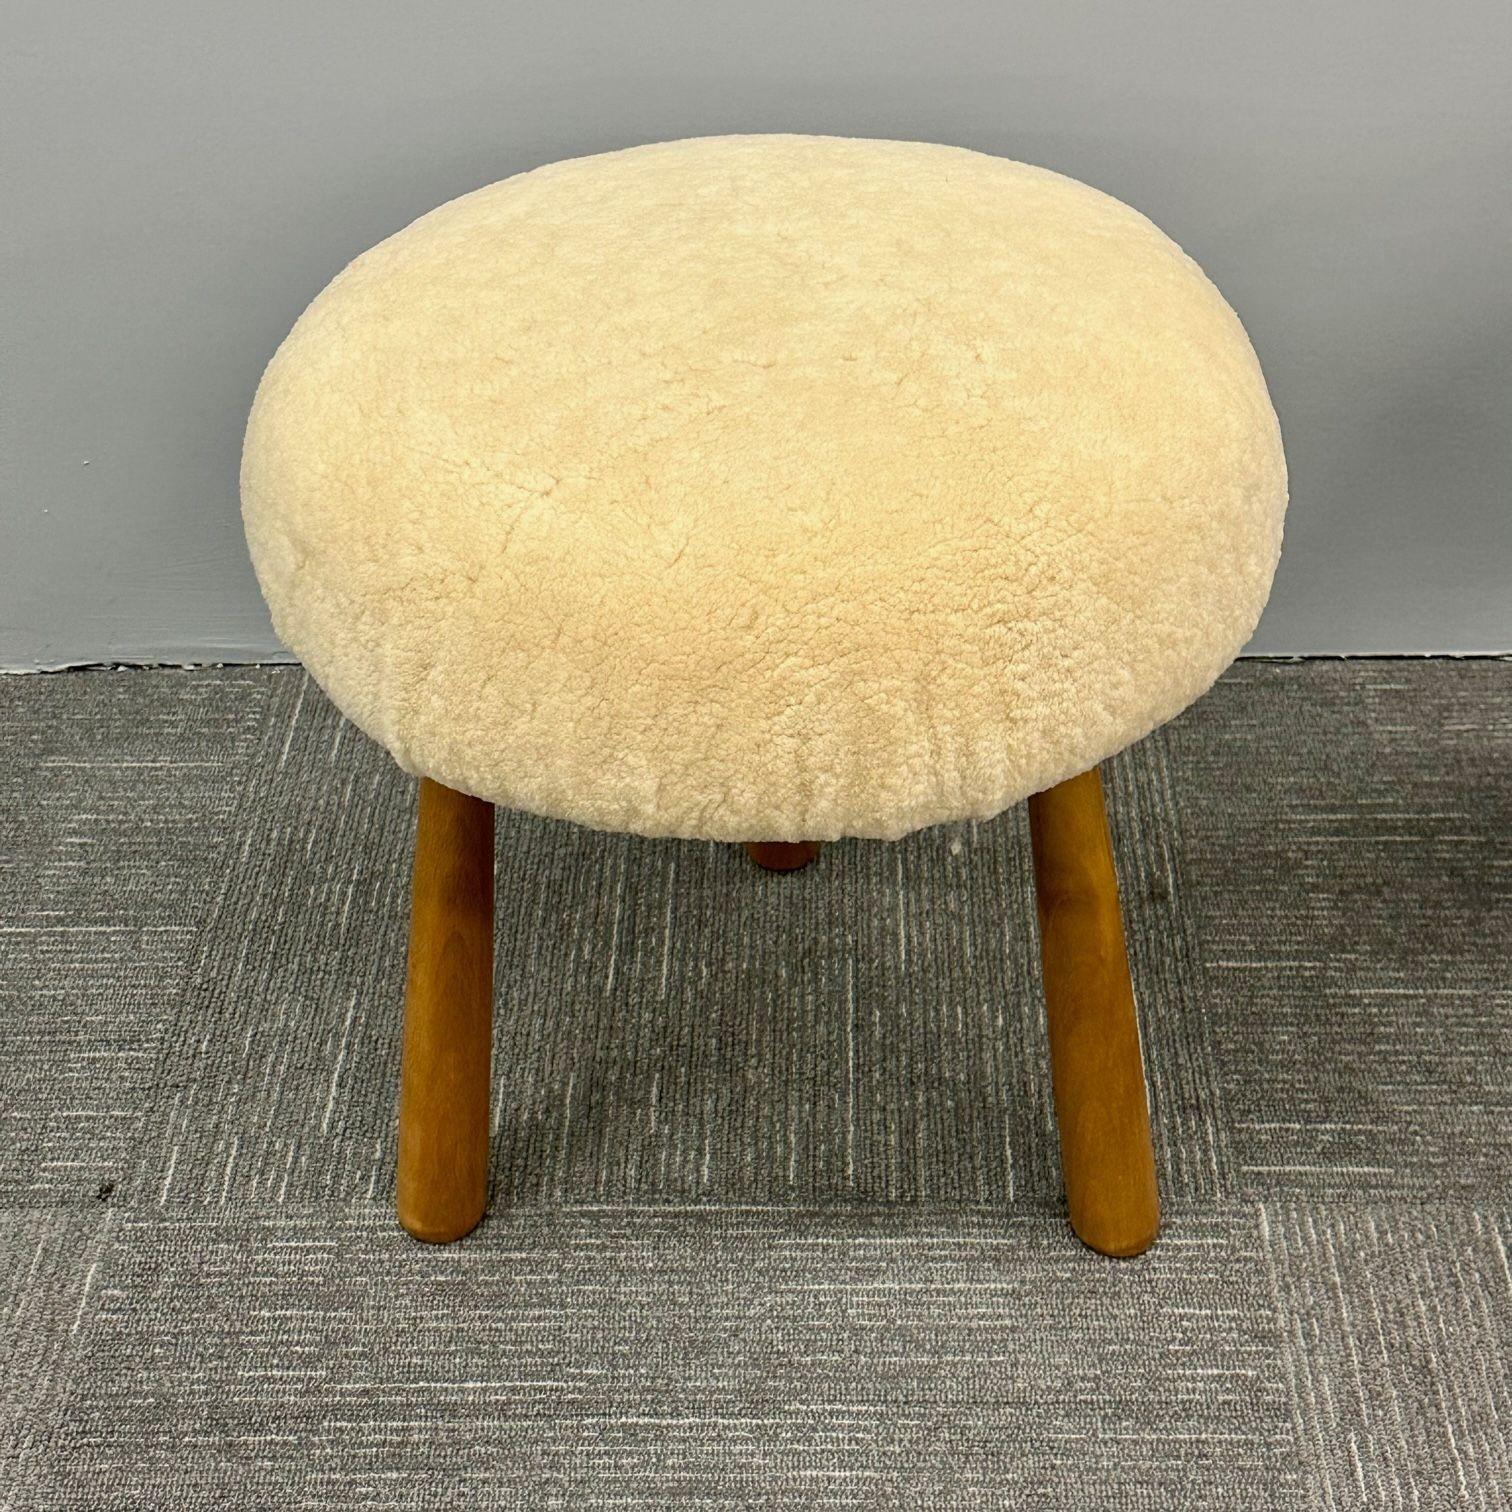 American Pair Contemporary Swedish Modern Style Sheepskin Footstools / Ottomans, Beige For Sale